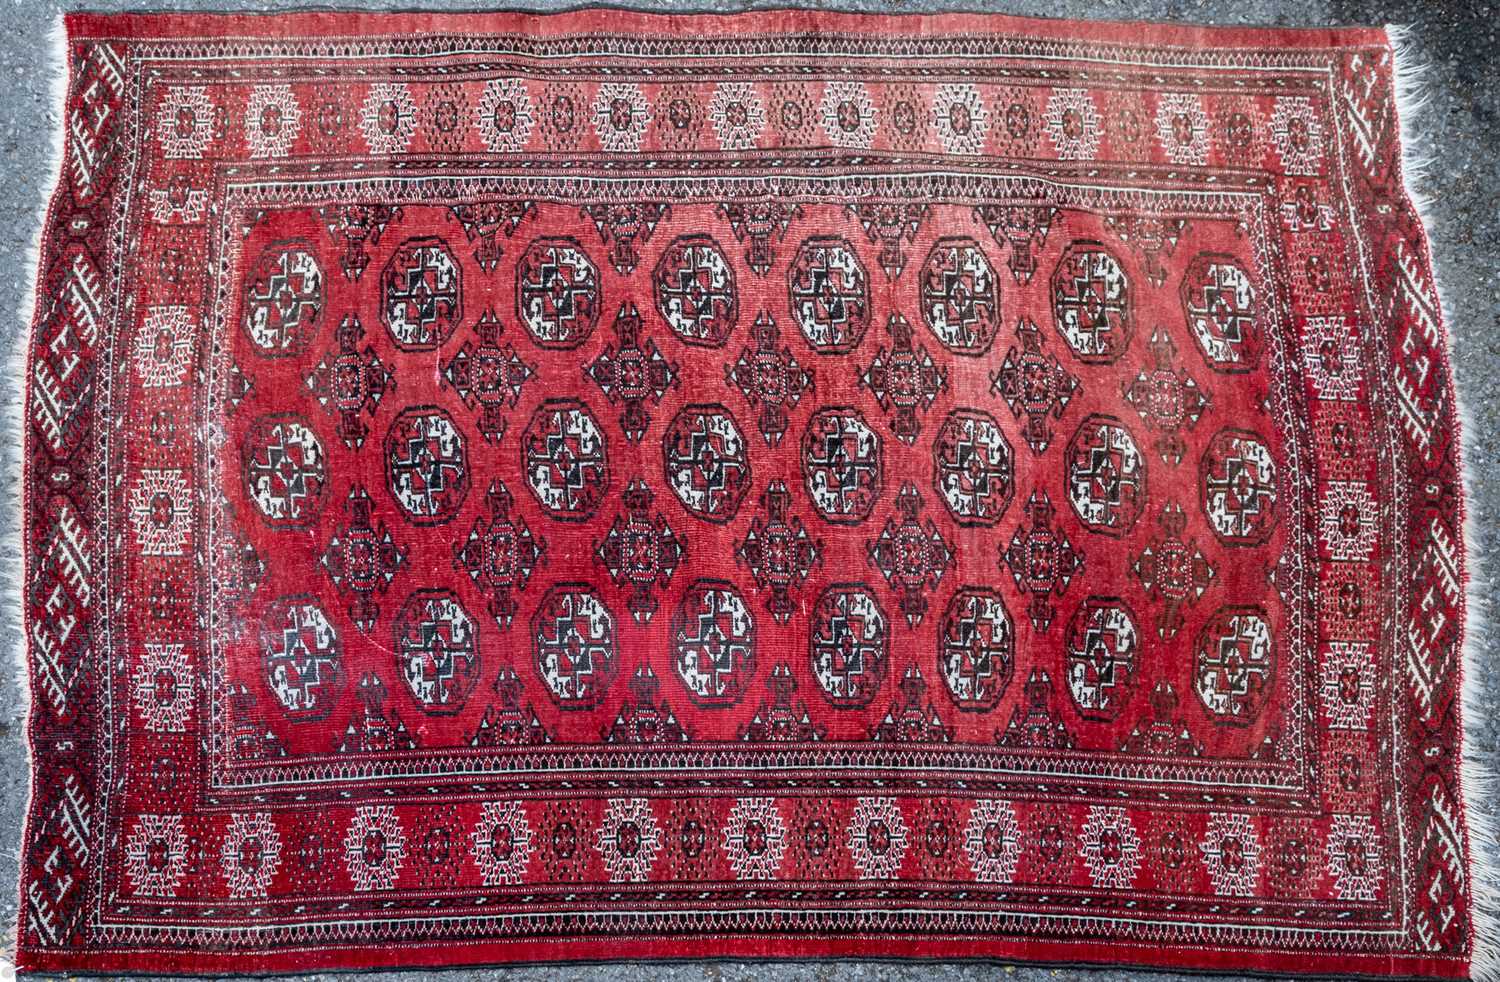 A red ground rug with all over geometric shapes within a brown and black banded border, 130cm x